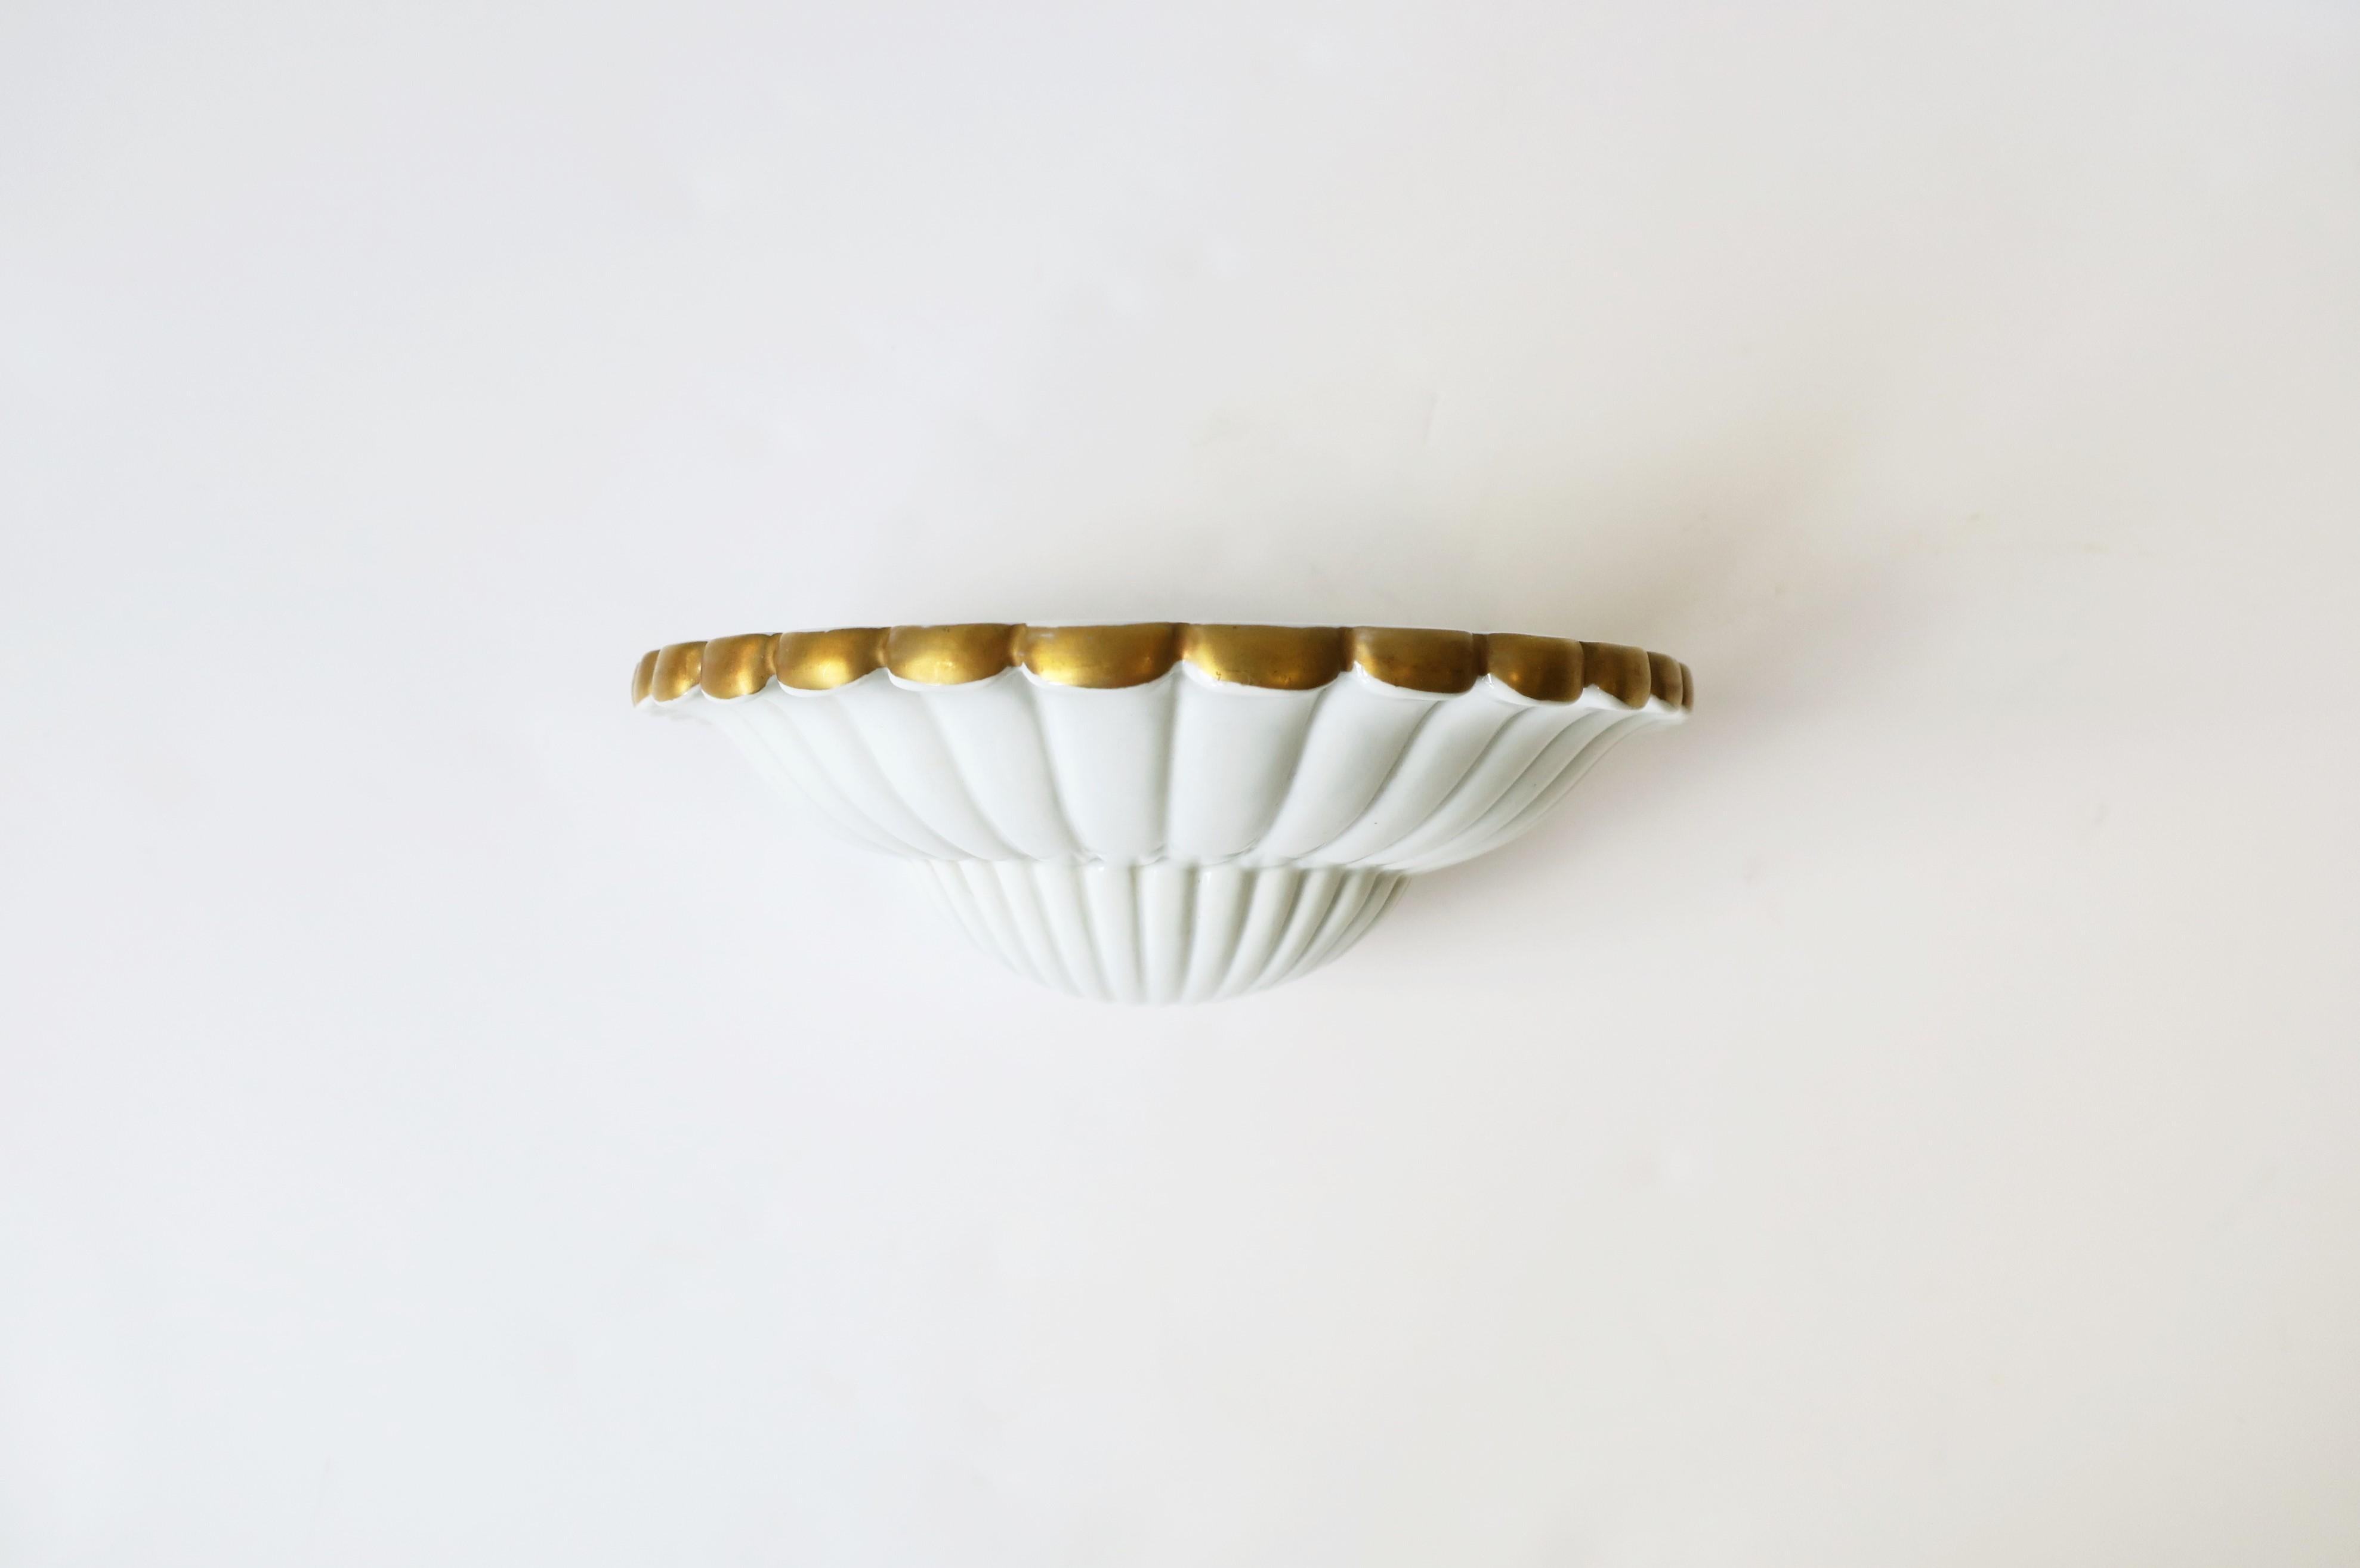 20th Century Wall Shelves or Brackets White and Gold with Scallop Seashell Design